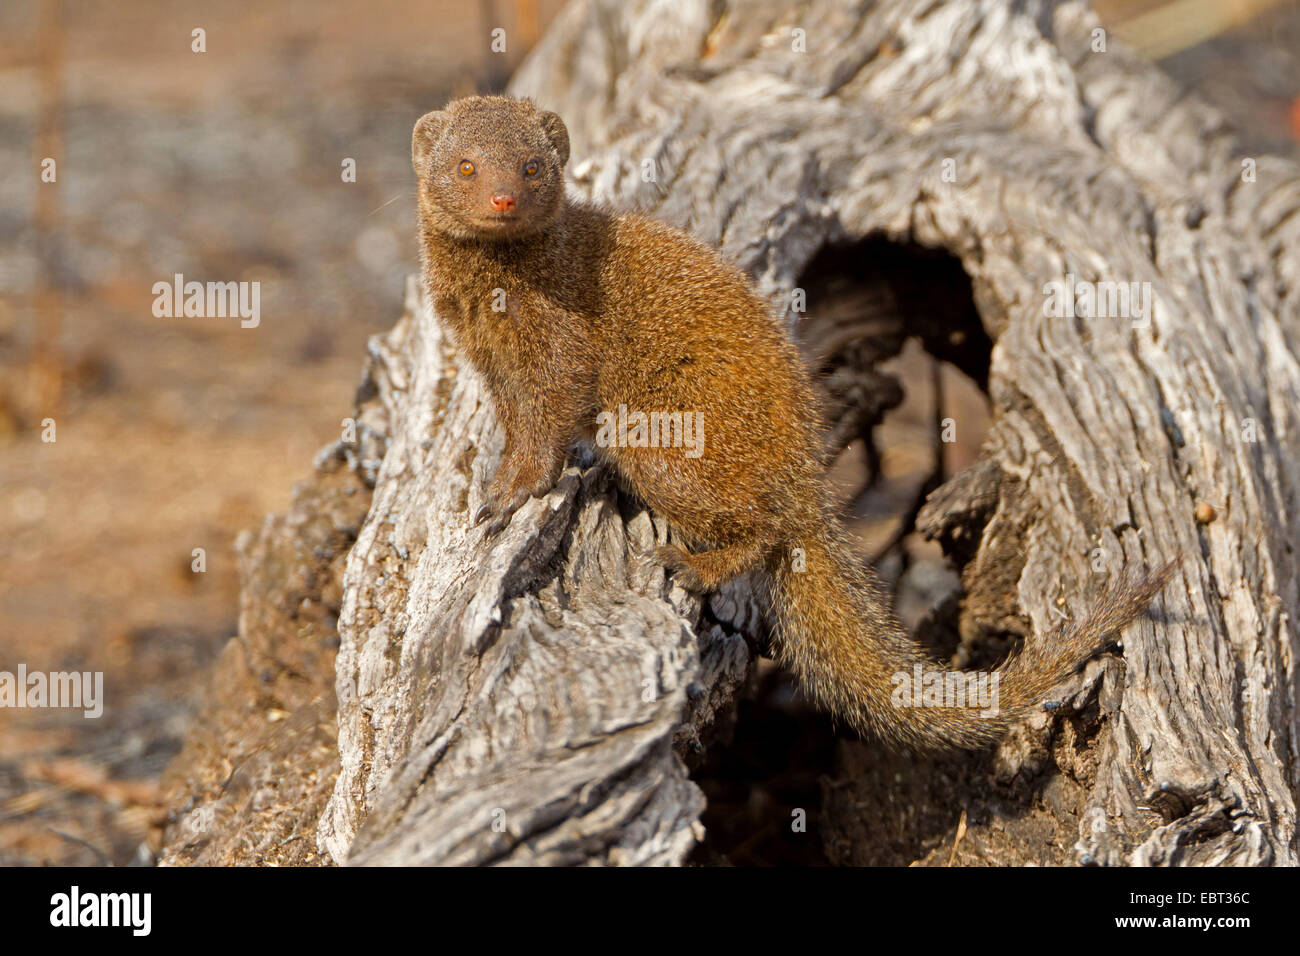 dwarf mongoose (Helogale parvula), sitting on a tree snag, South Africa, Krueger National Park, Letaba Camp Stock Photo